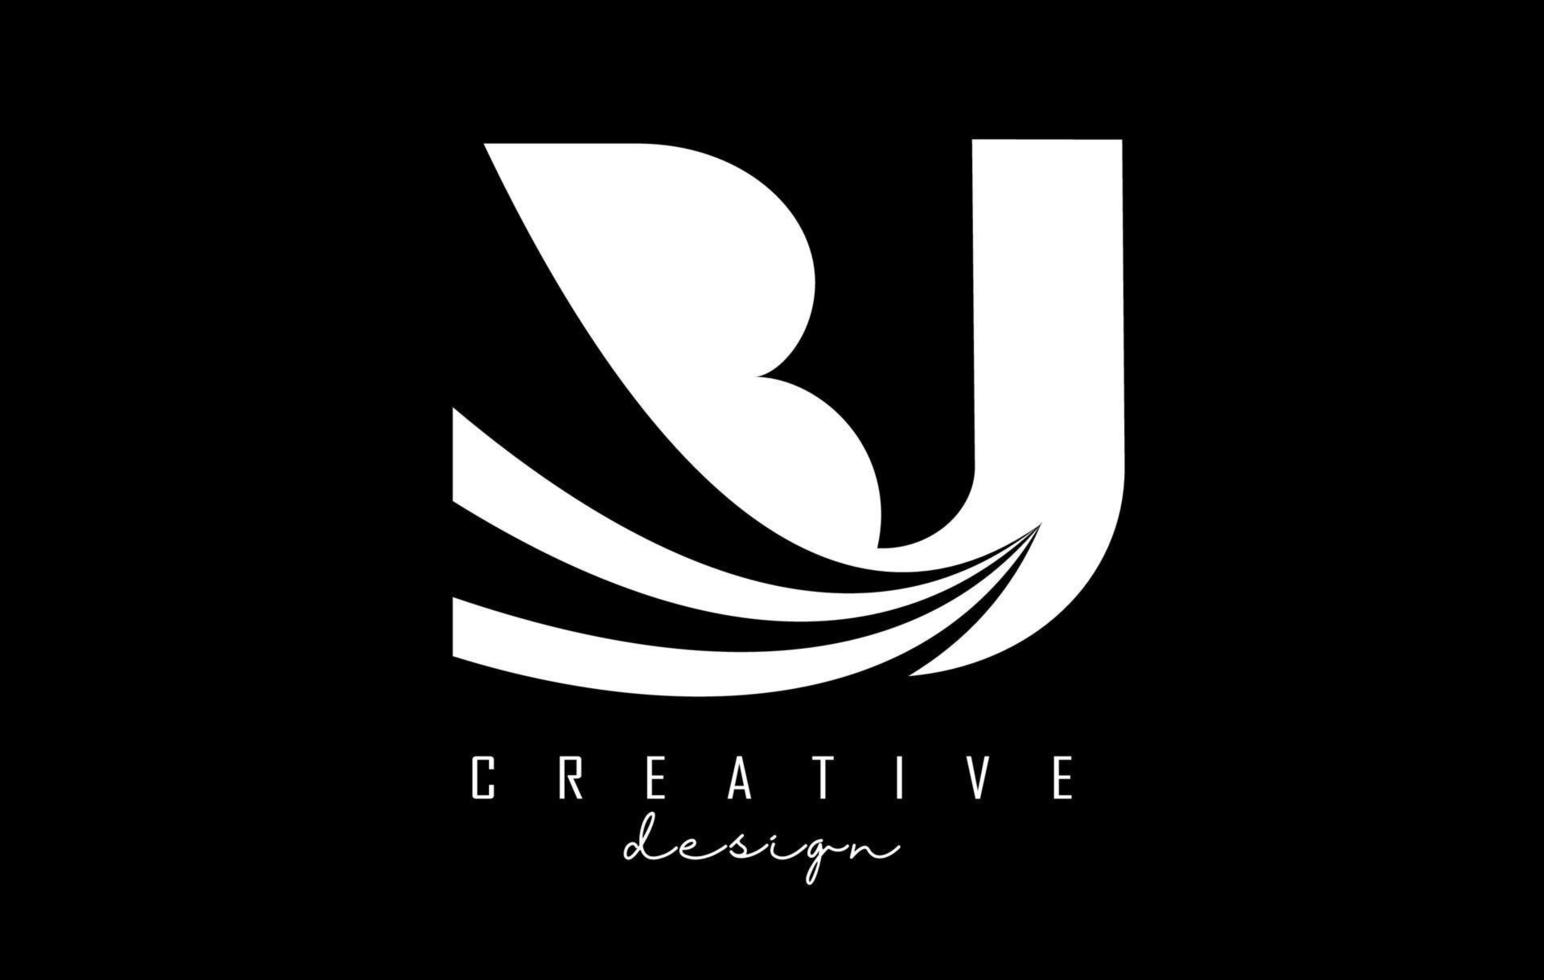 White letters Bj b j logo with leading lines and road concept design. Letters with geometric design. vector